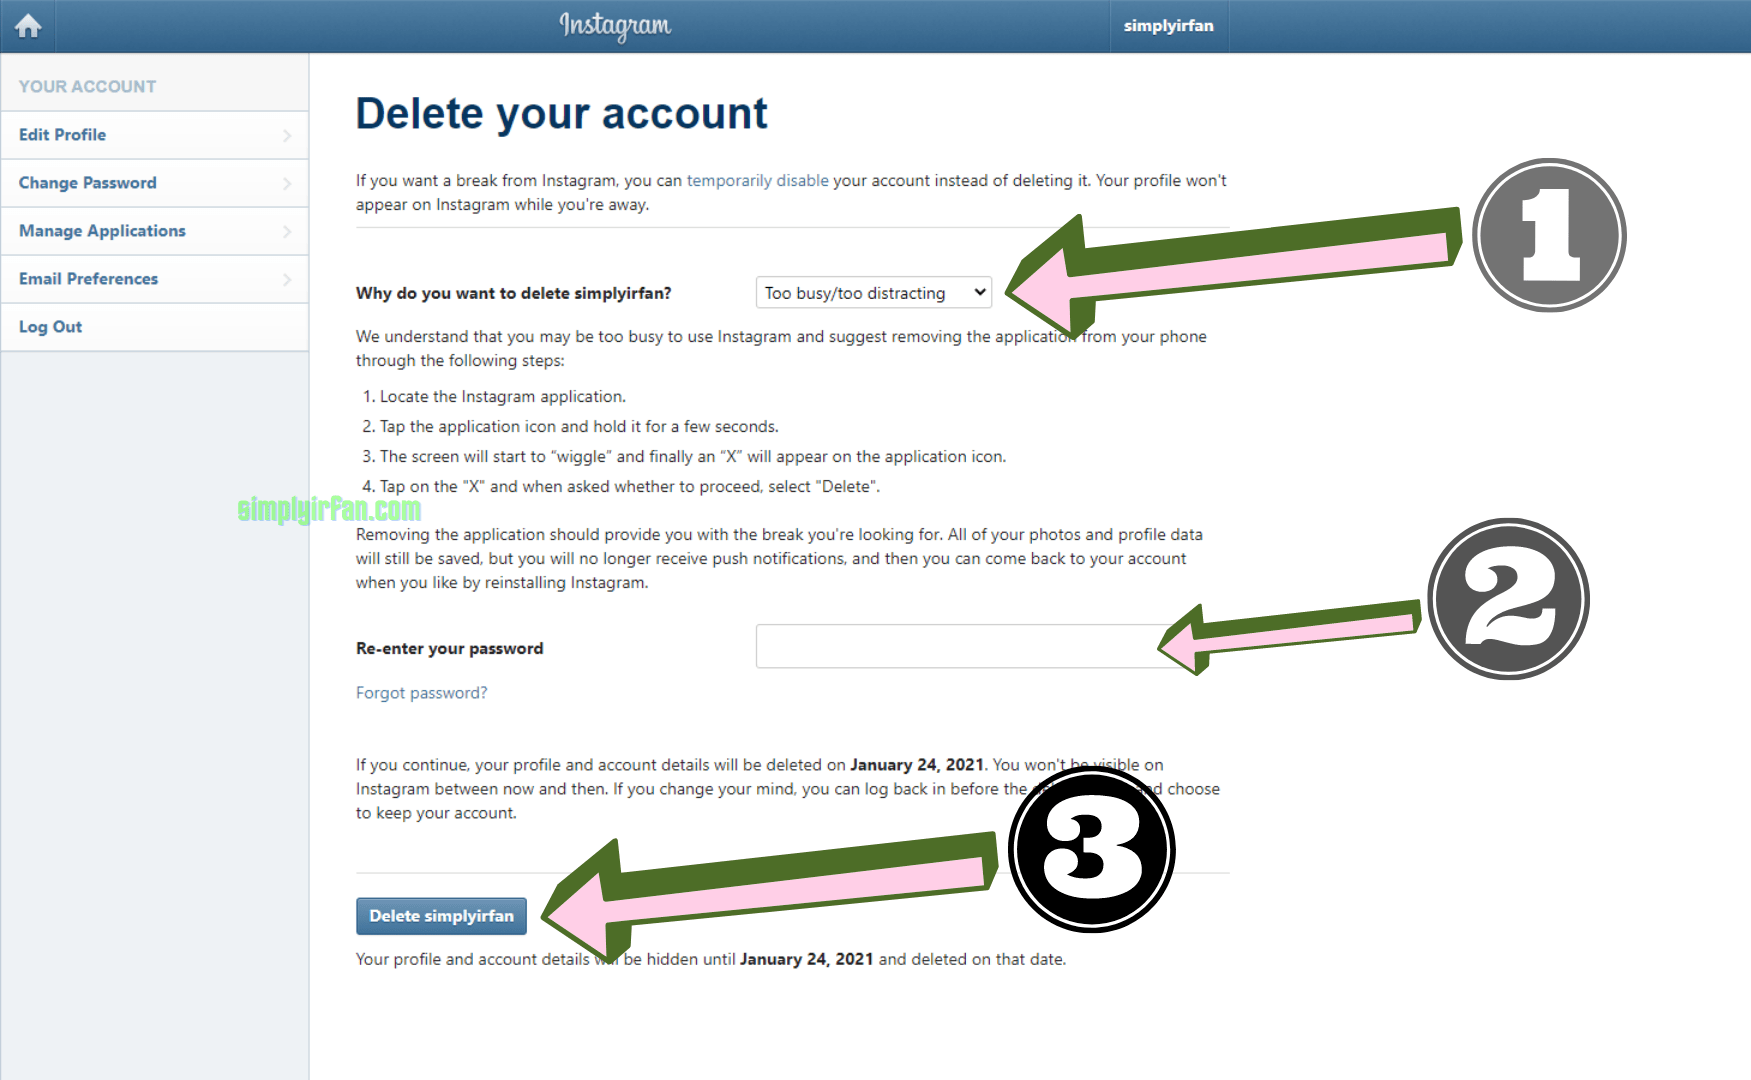 Delete Instagram account following these steps